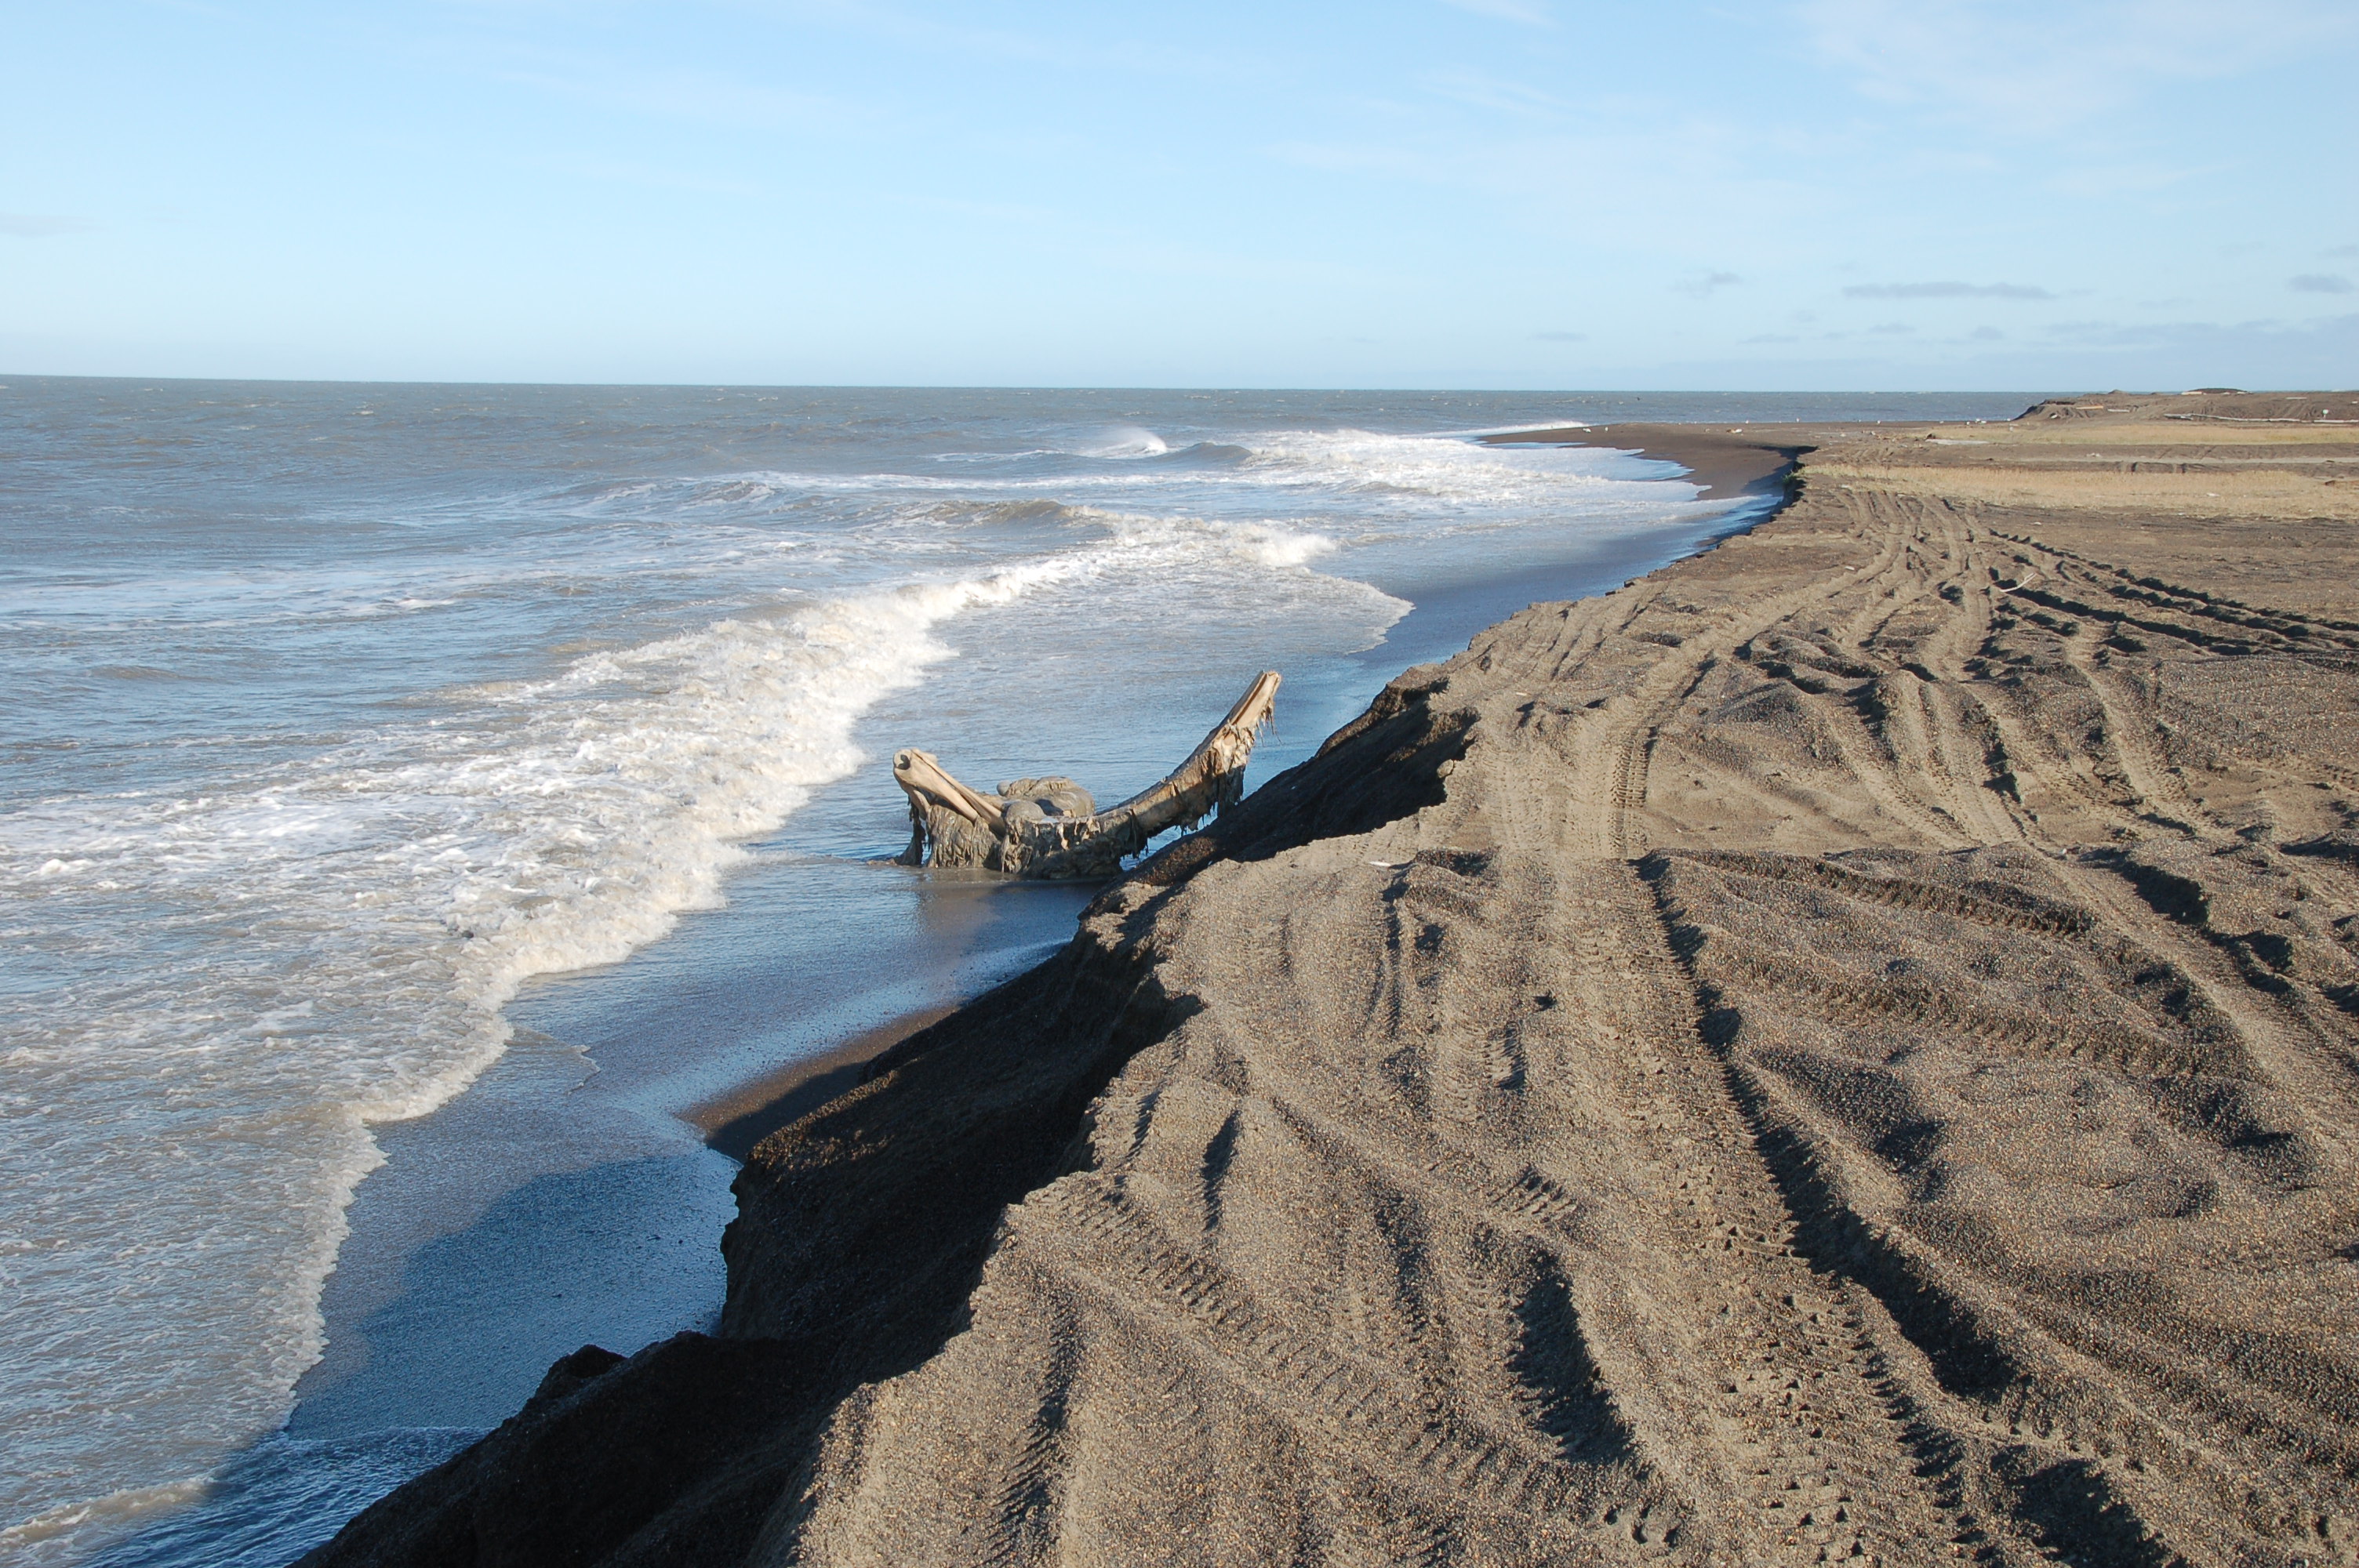 The beach at Point Barrow, the northernmost point of Alaska, near the Nuvuk site where erosion revealed an ancient graveyard. (U.S. Coast Guard)